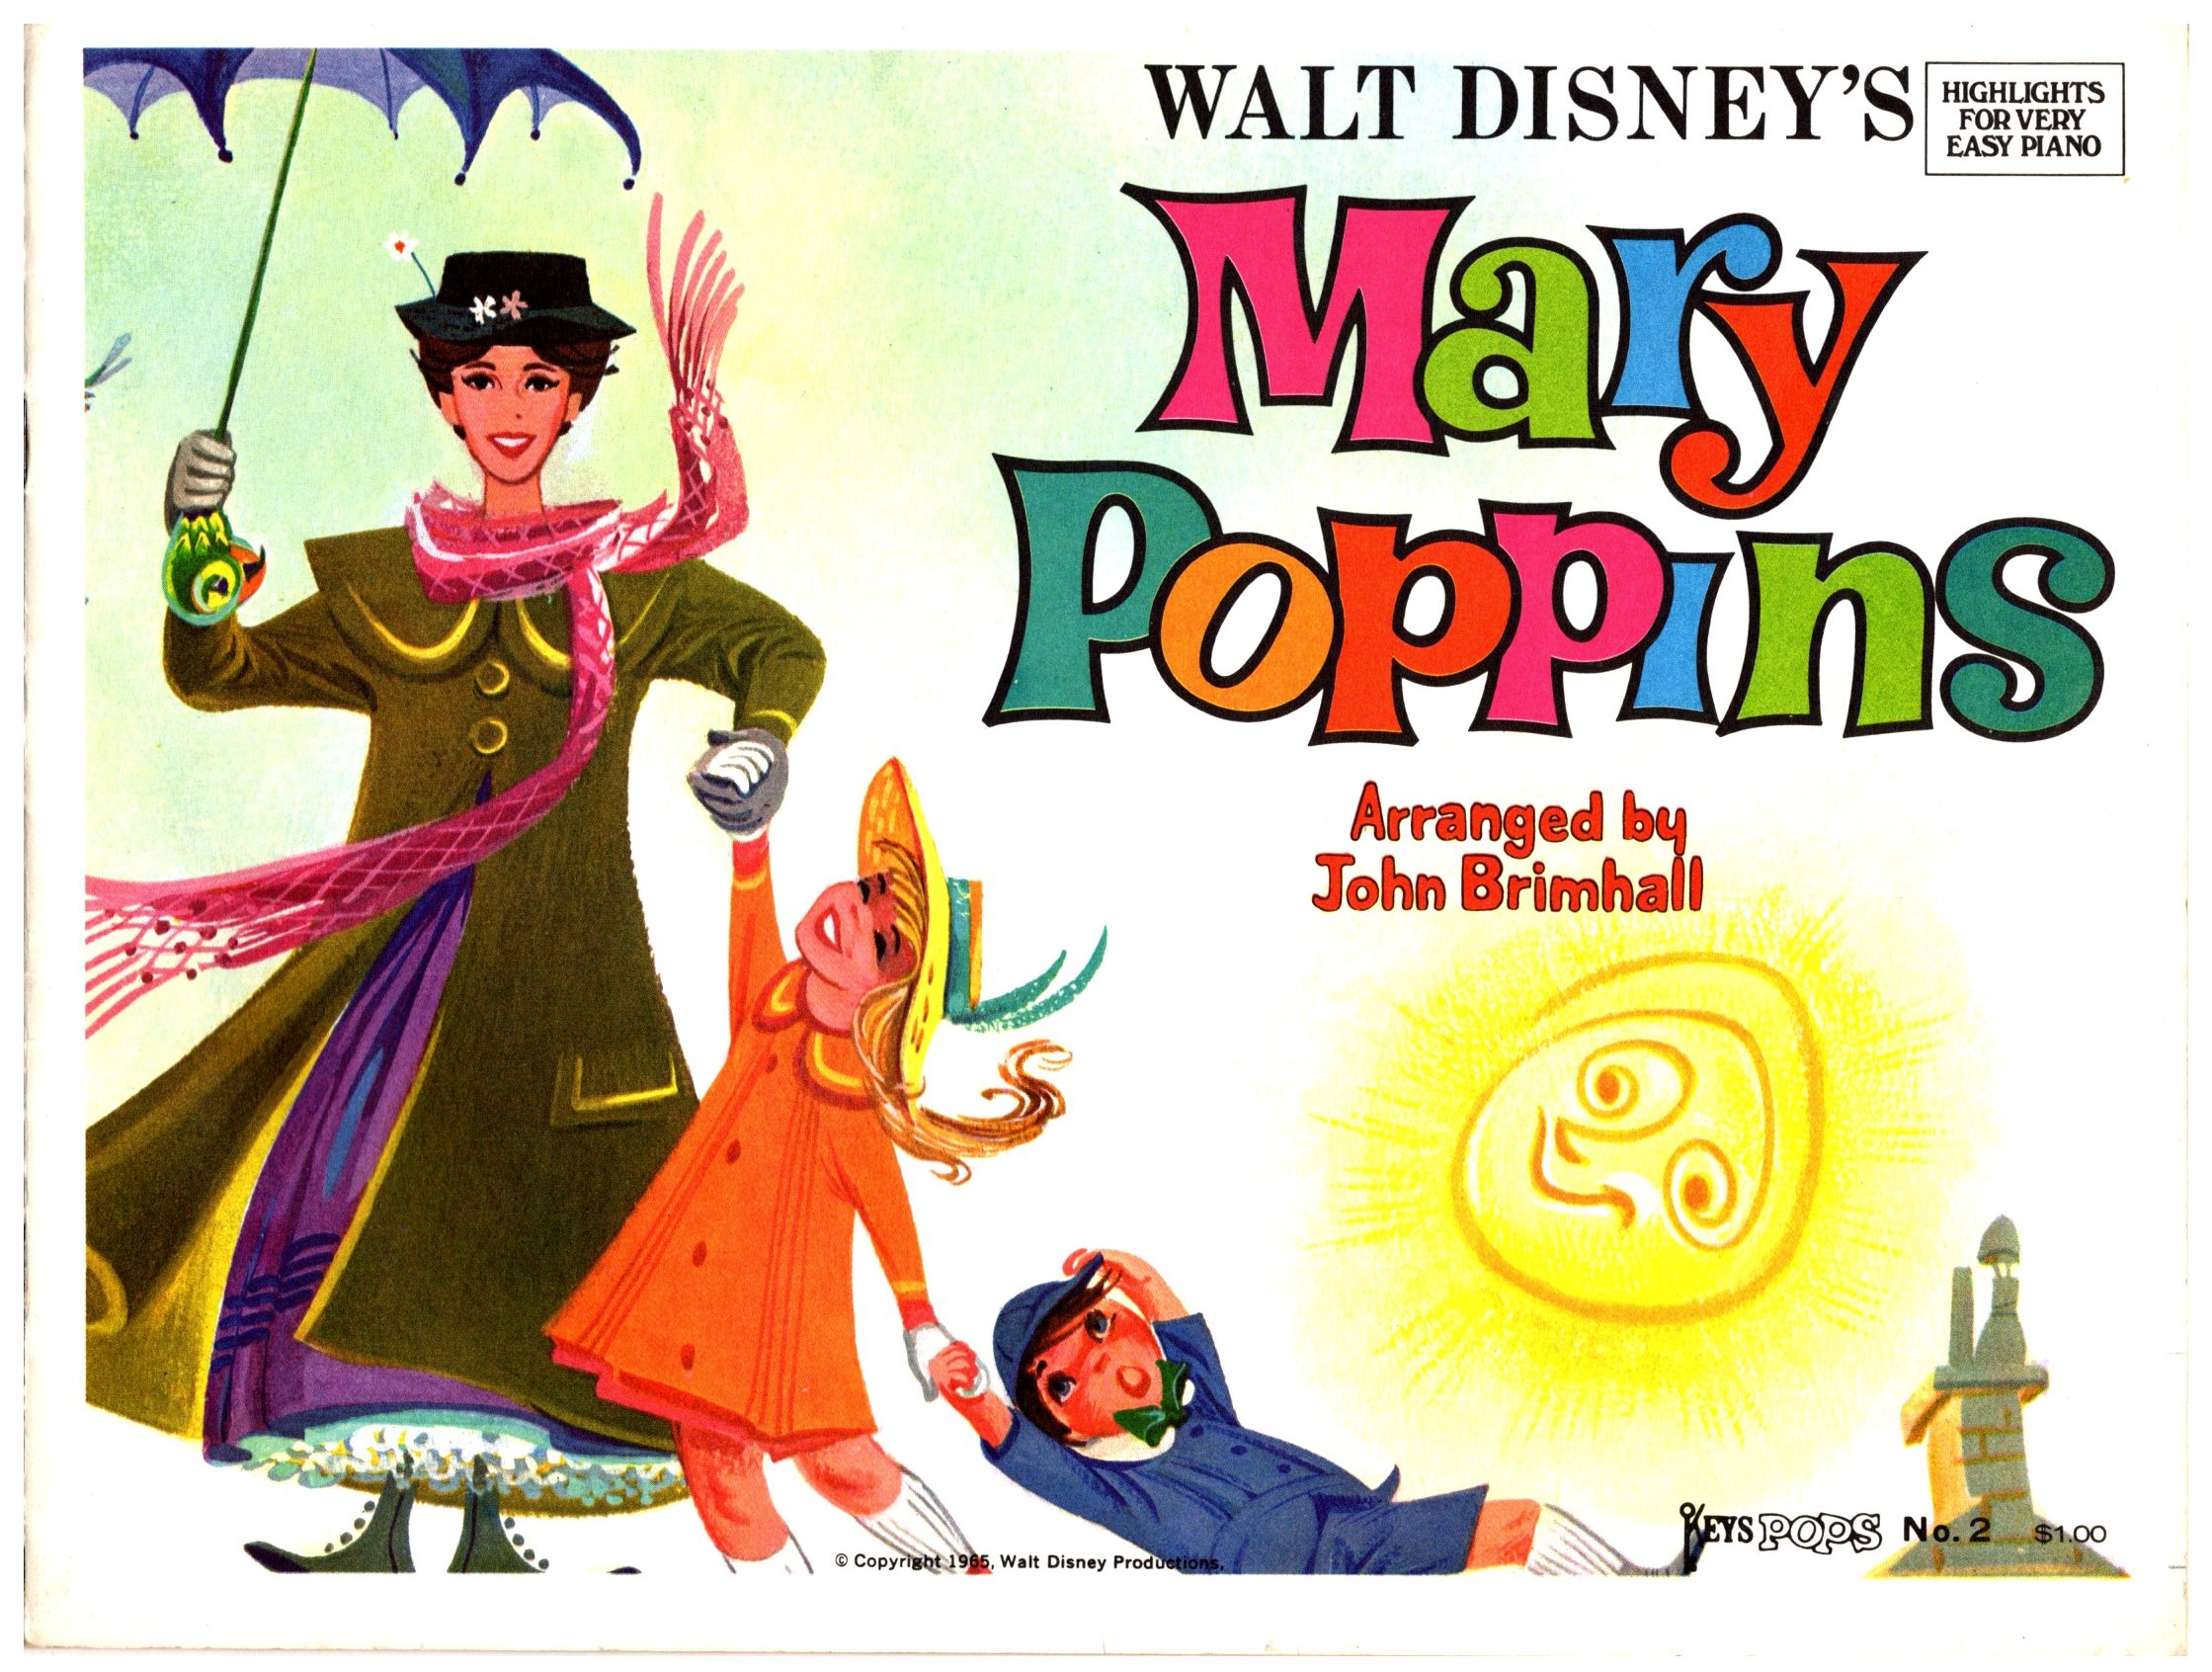 Image for Walt Disney's Mary Poppins, Highlights for Very Easy Piano :  Arranged by John Brimhall